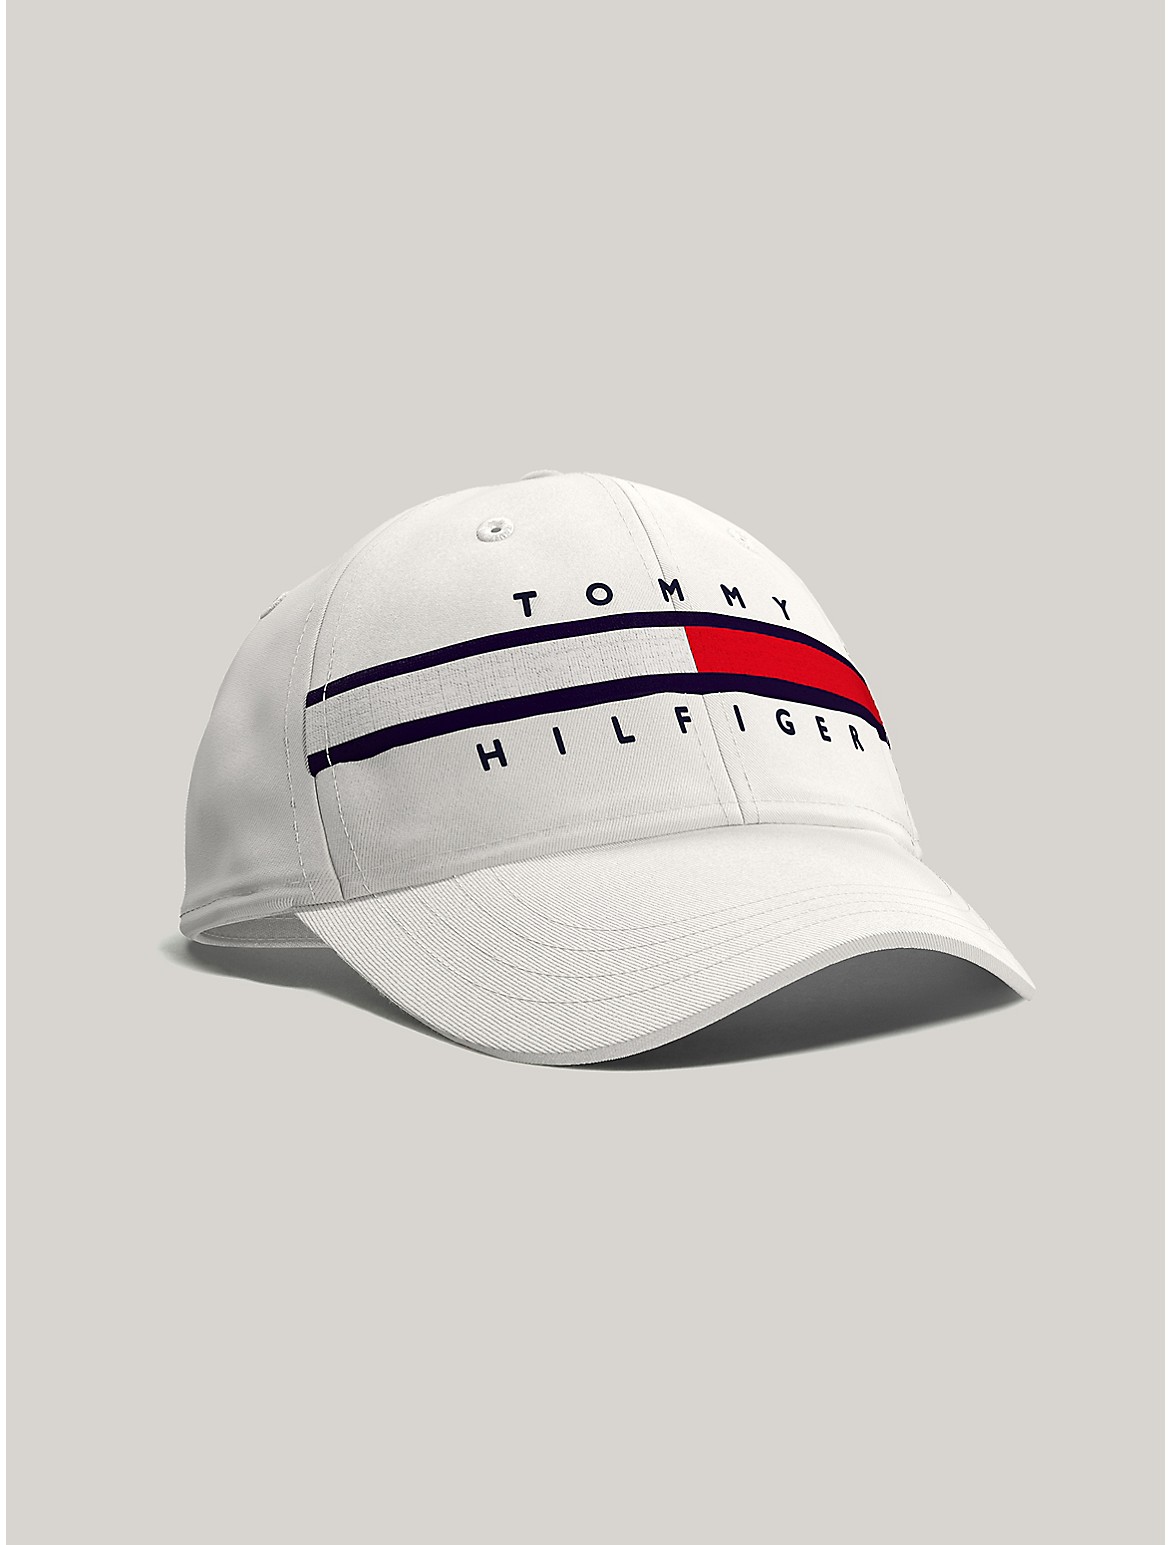 Tommy Hilfiger Flag Baseball Cap In Bright White